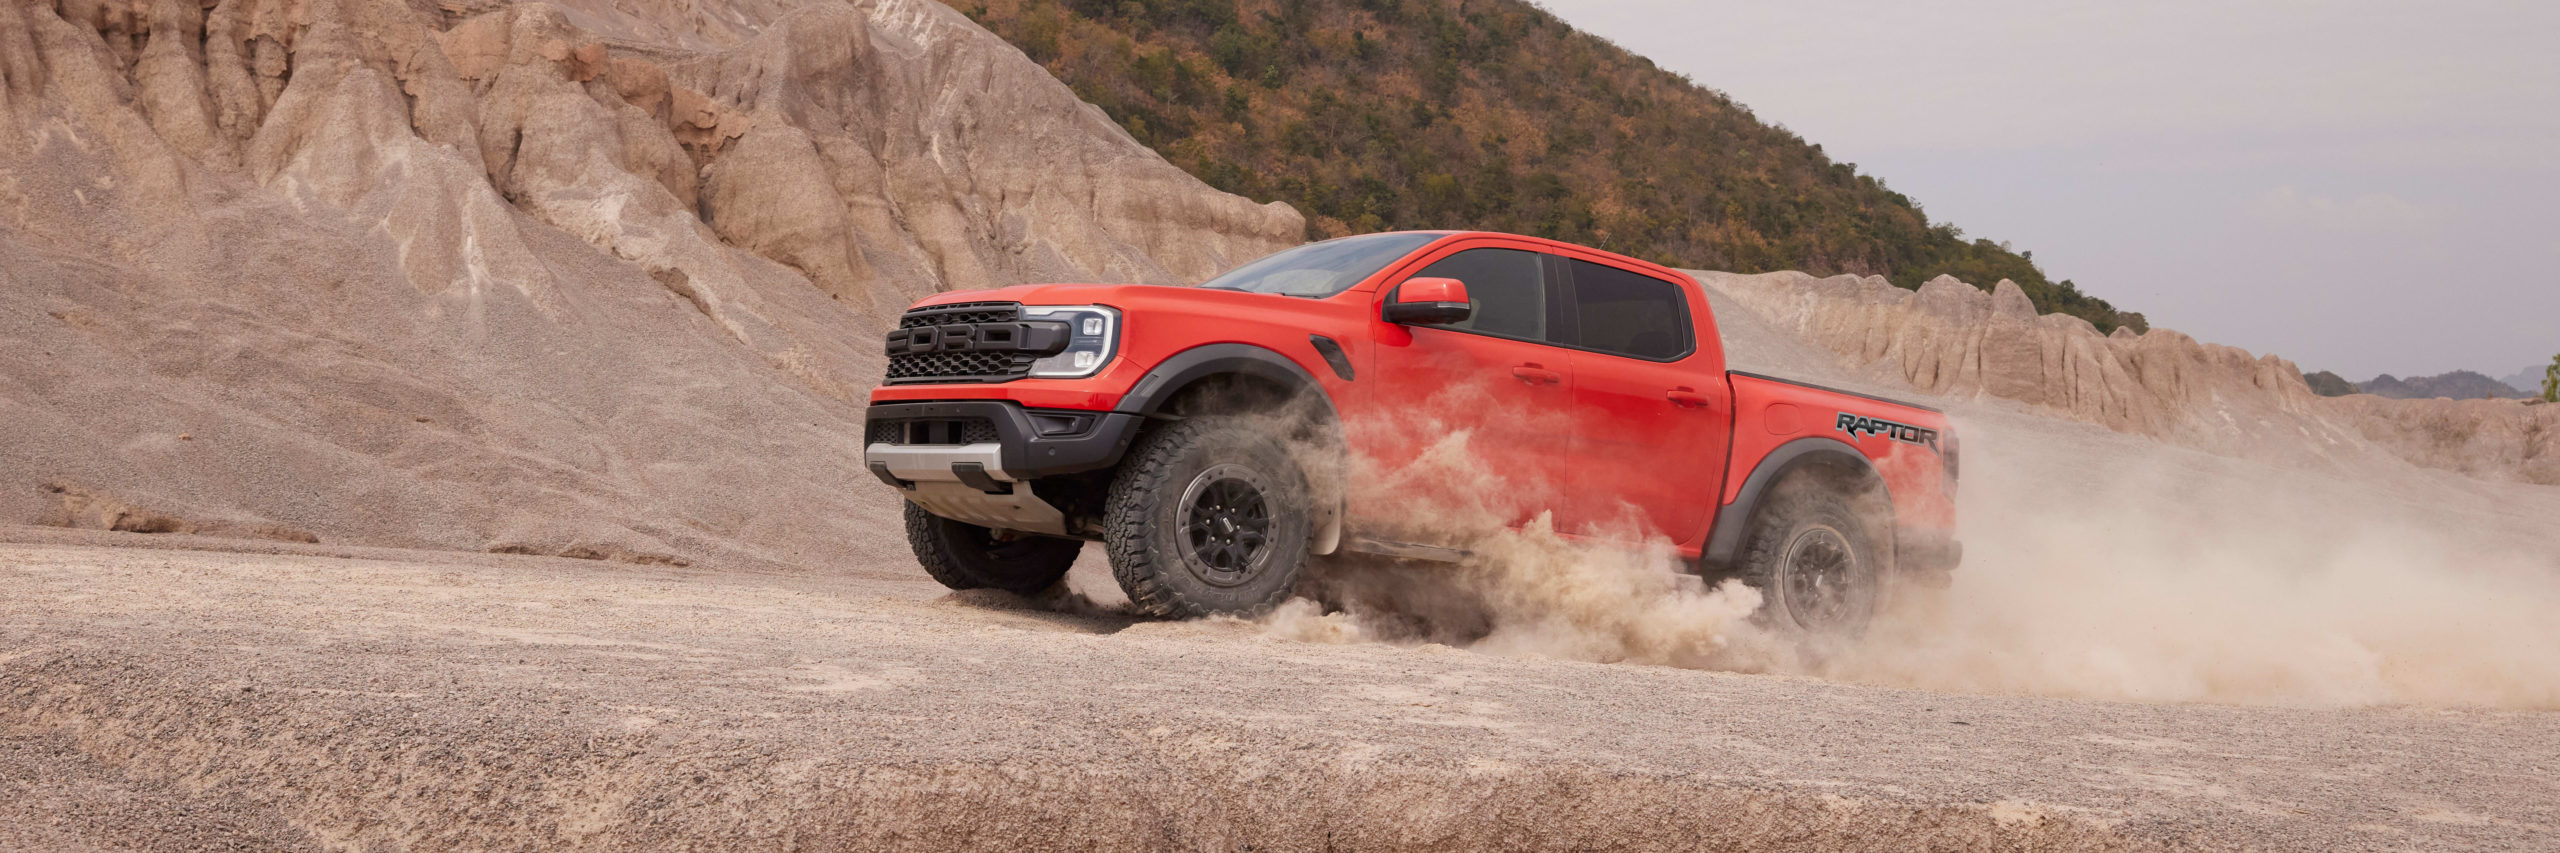 5 things we love about the next-gen ford ranger raptor